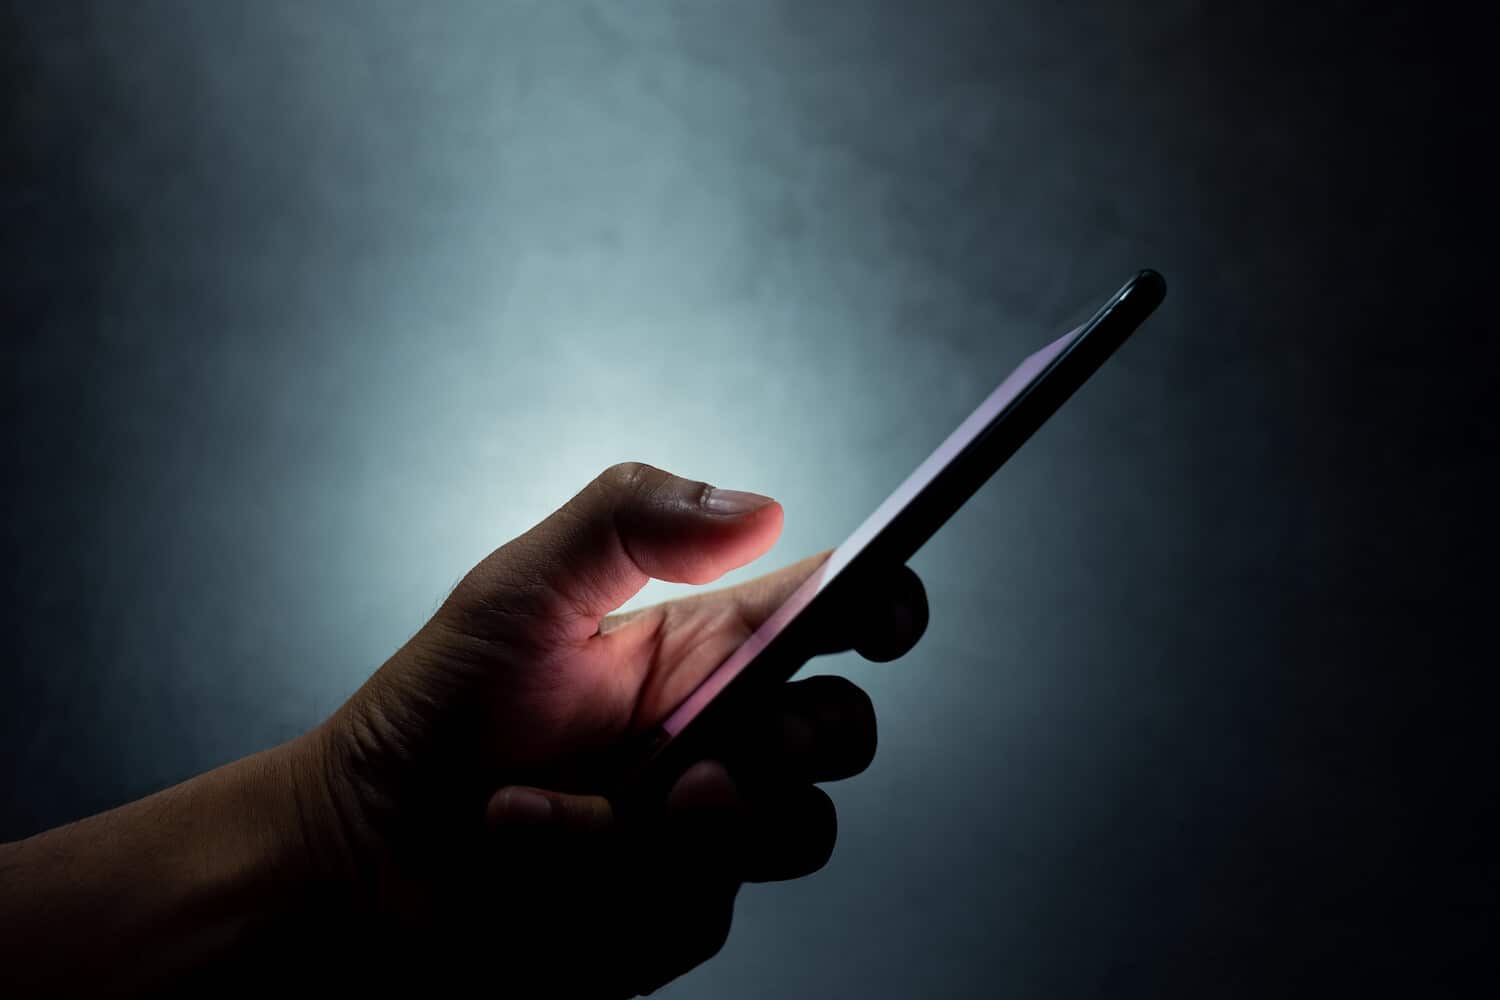 silhouette of a hand holding a mobile phone in darkness